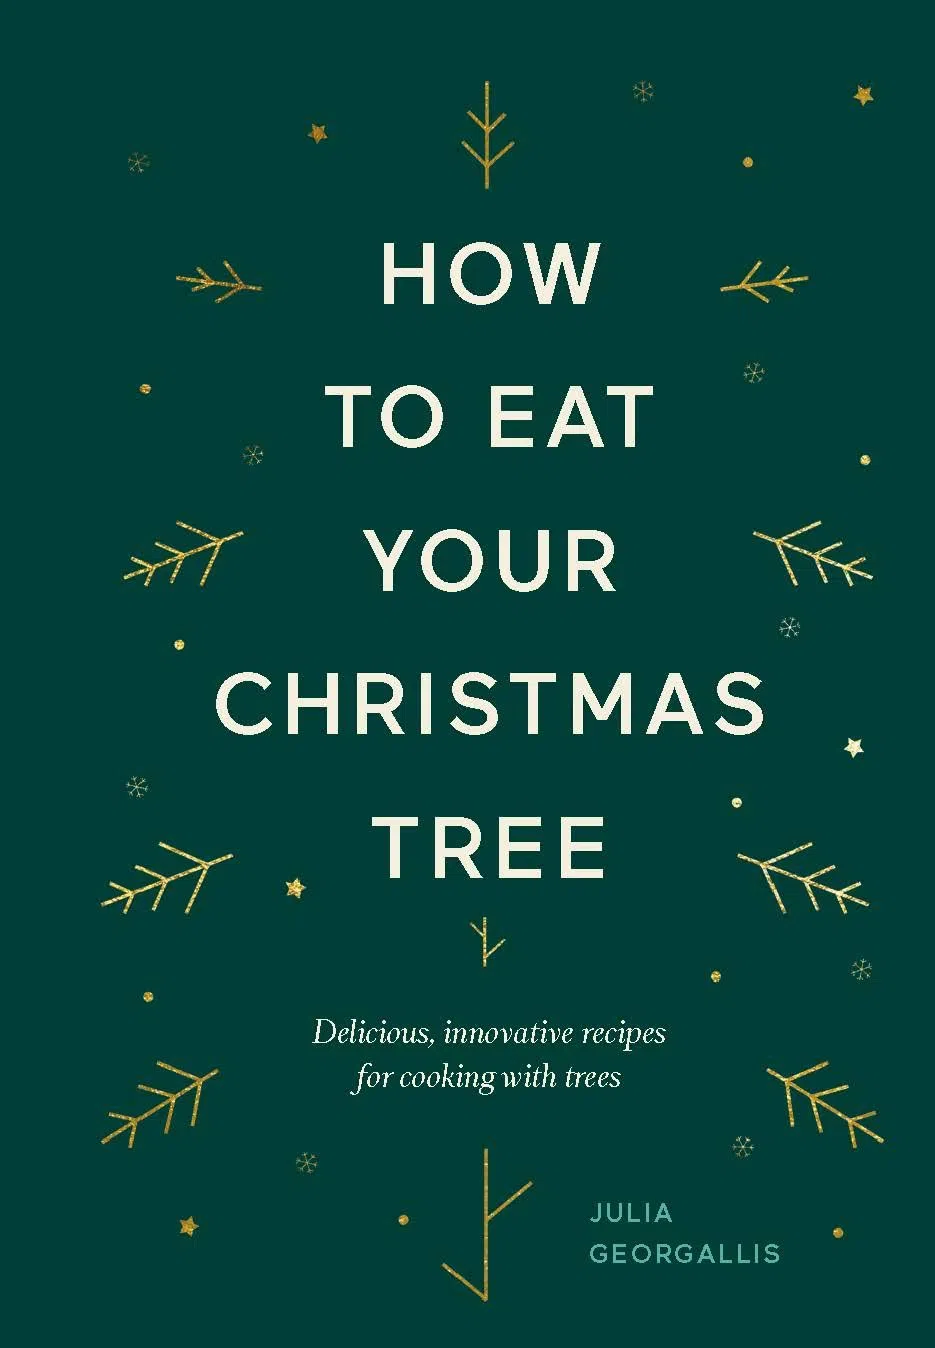 Would You Eat Your Christmas Tree?